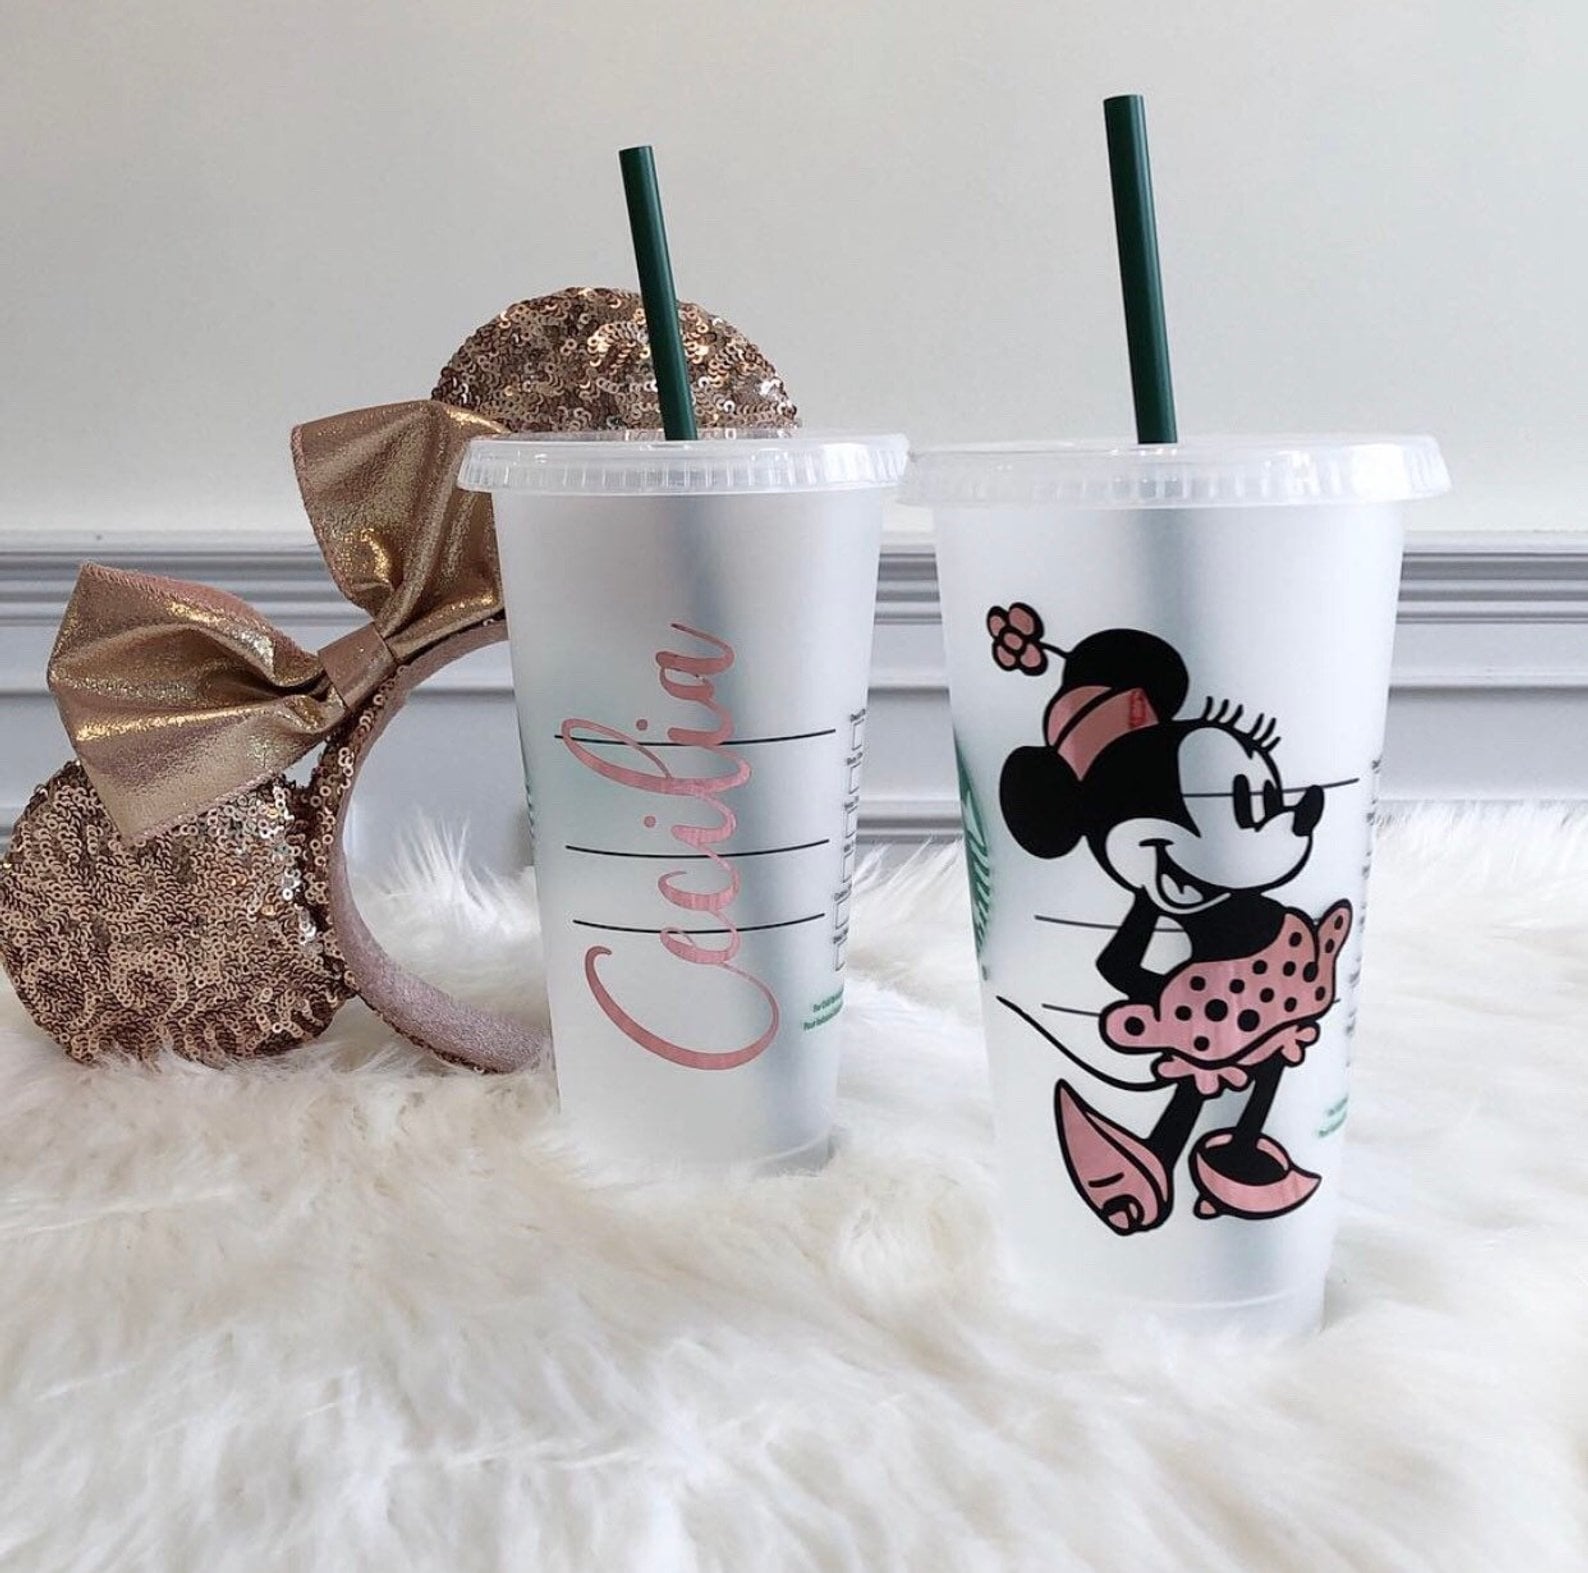 I made these stickers based off the Starbucks cups In the parks! I